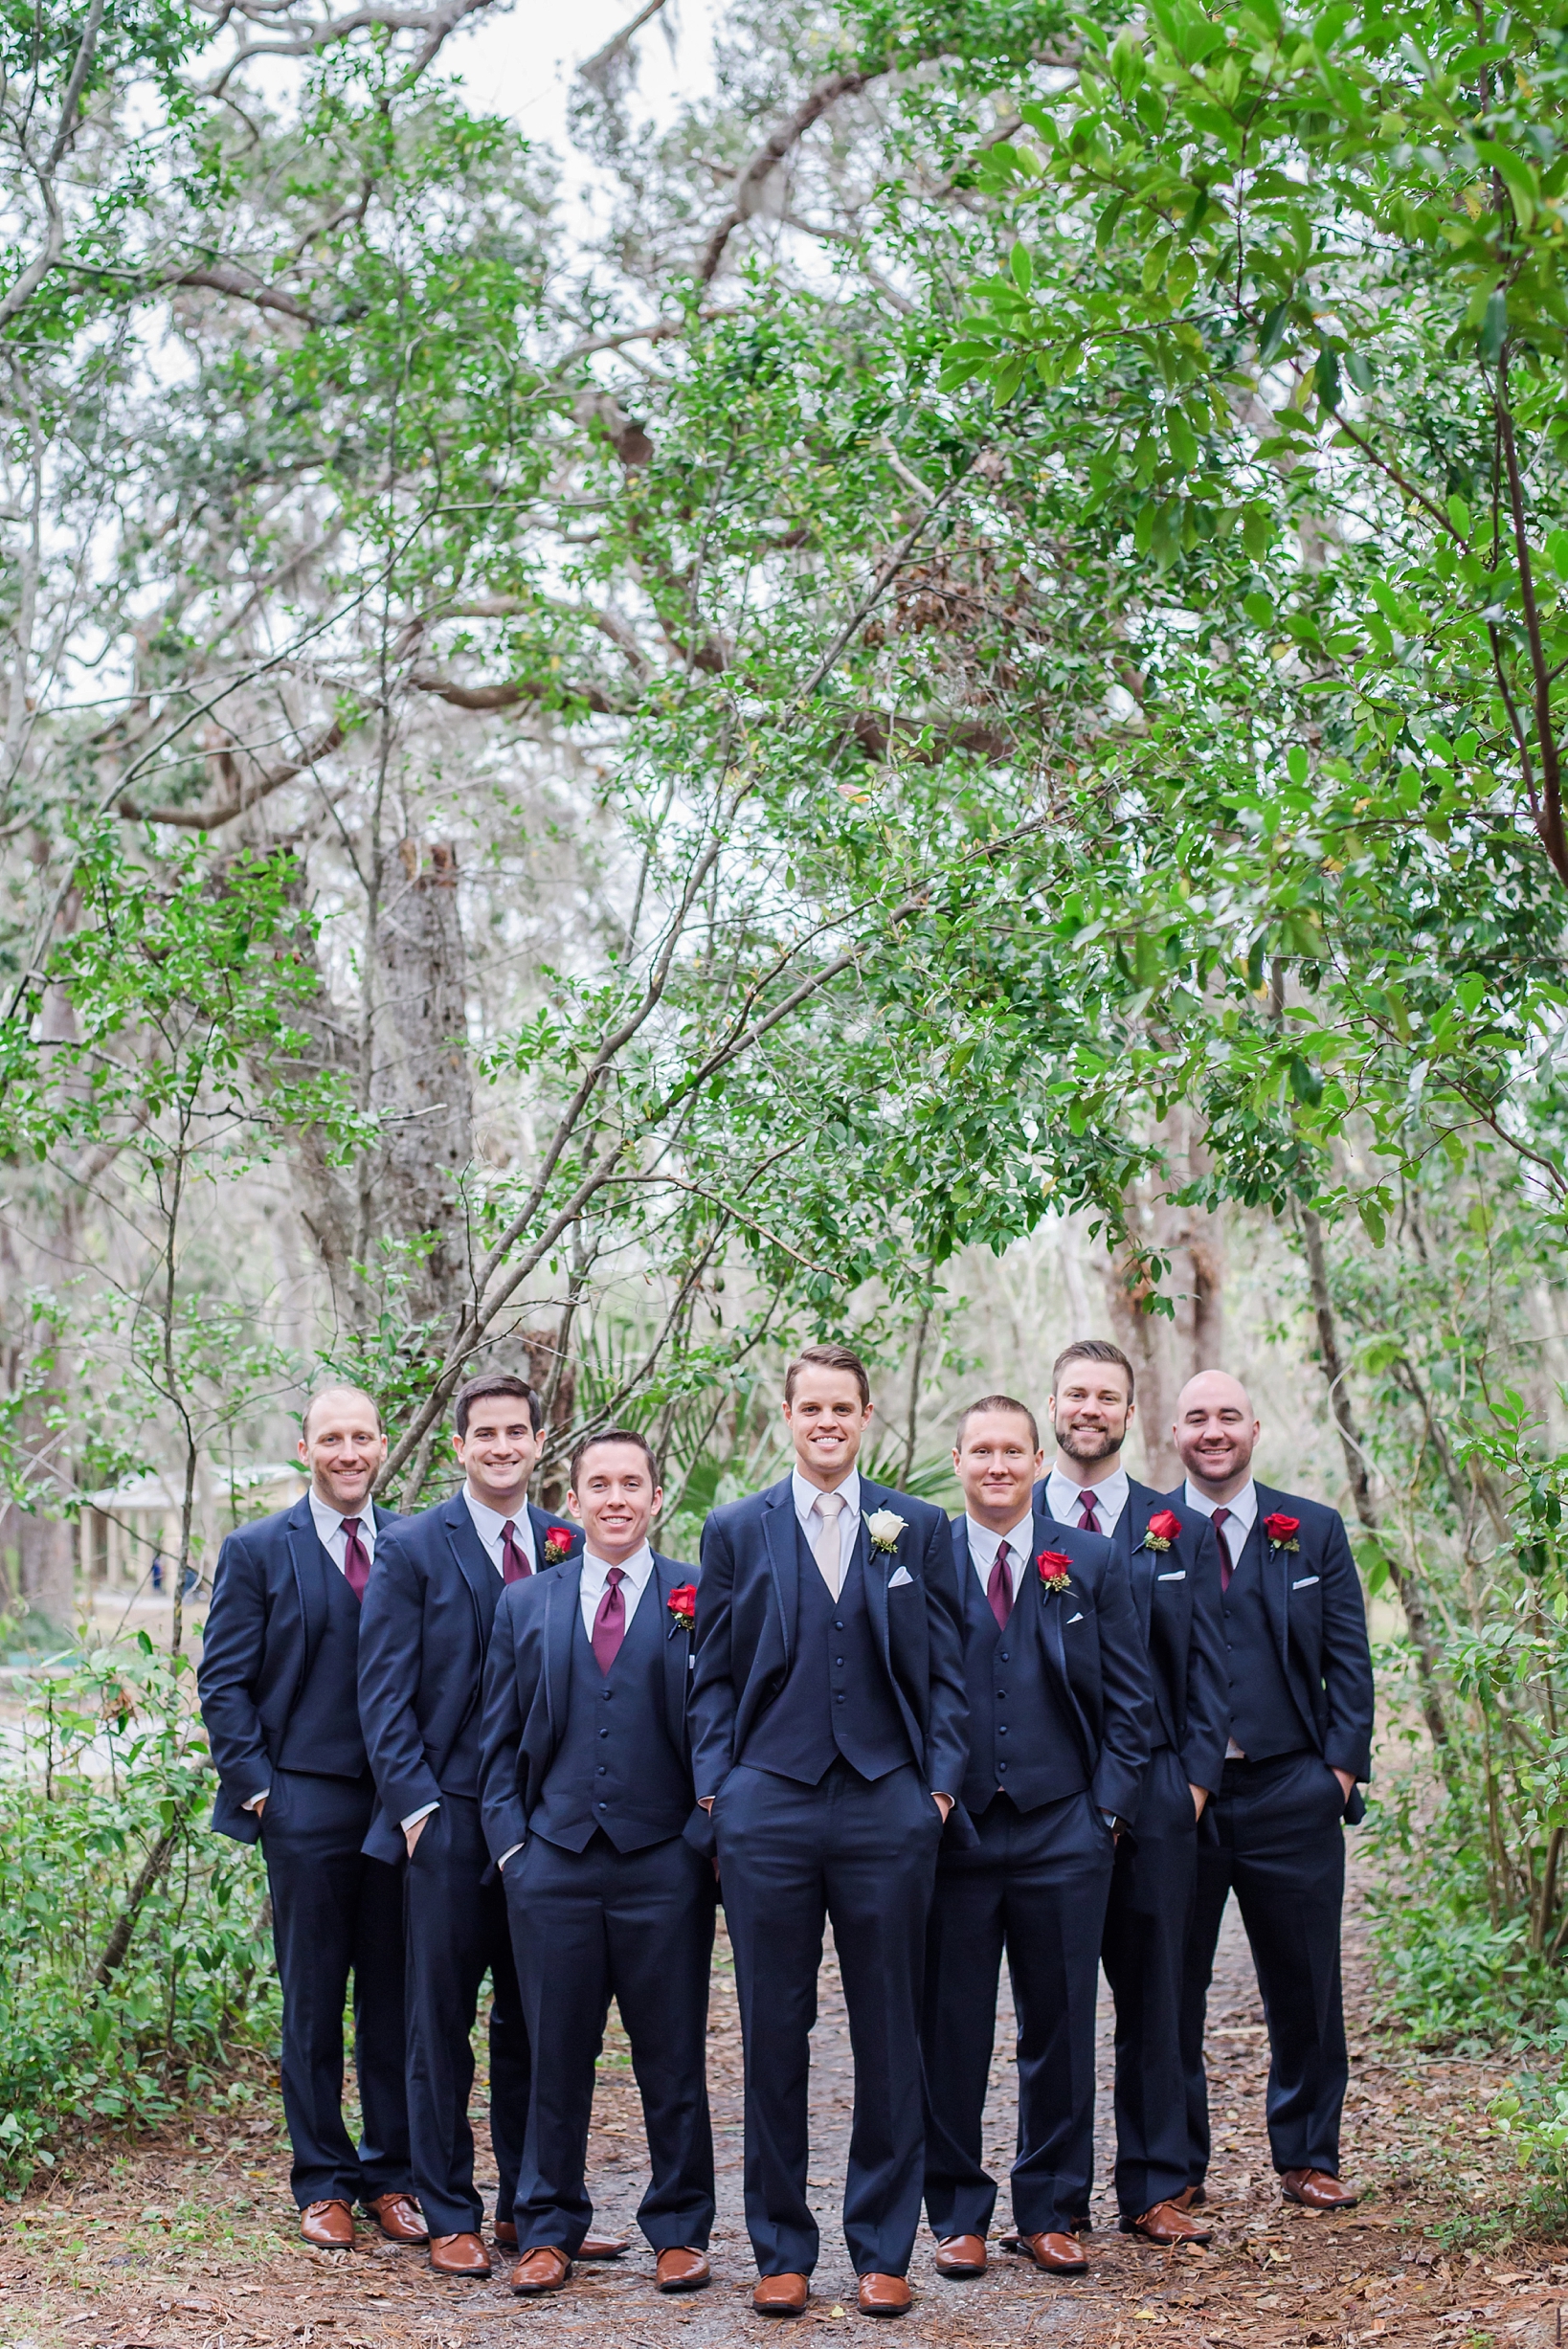 Groom and his Groomsmen in a traditional group shot with greenery all around by Sarah & Ben Photography. Check out all our work at www.sarahben.com